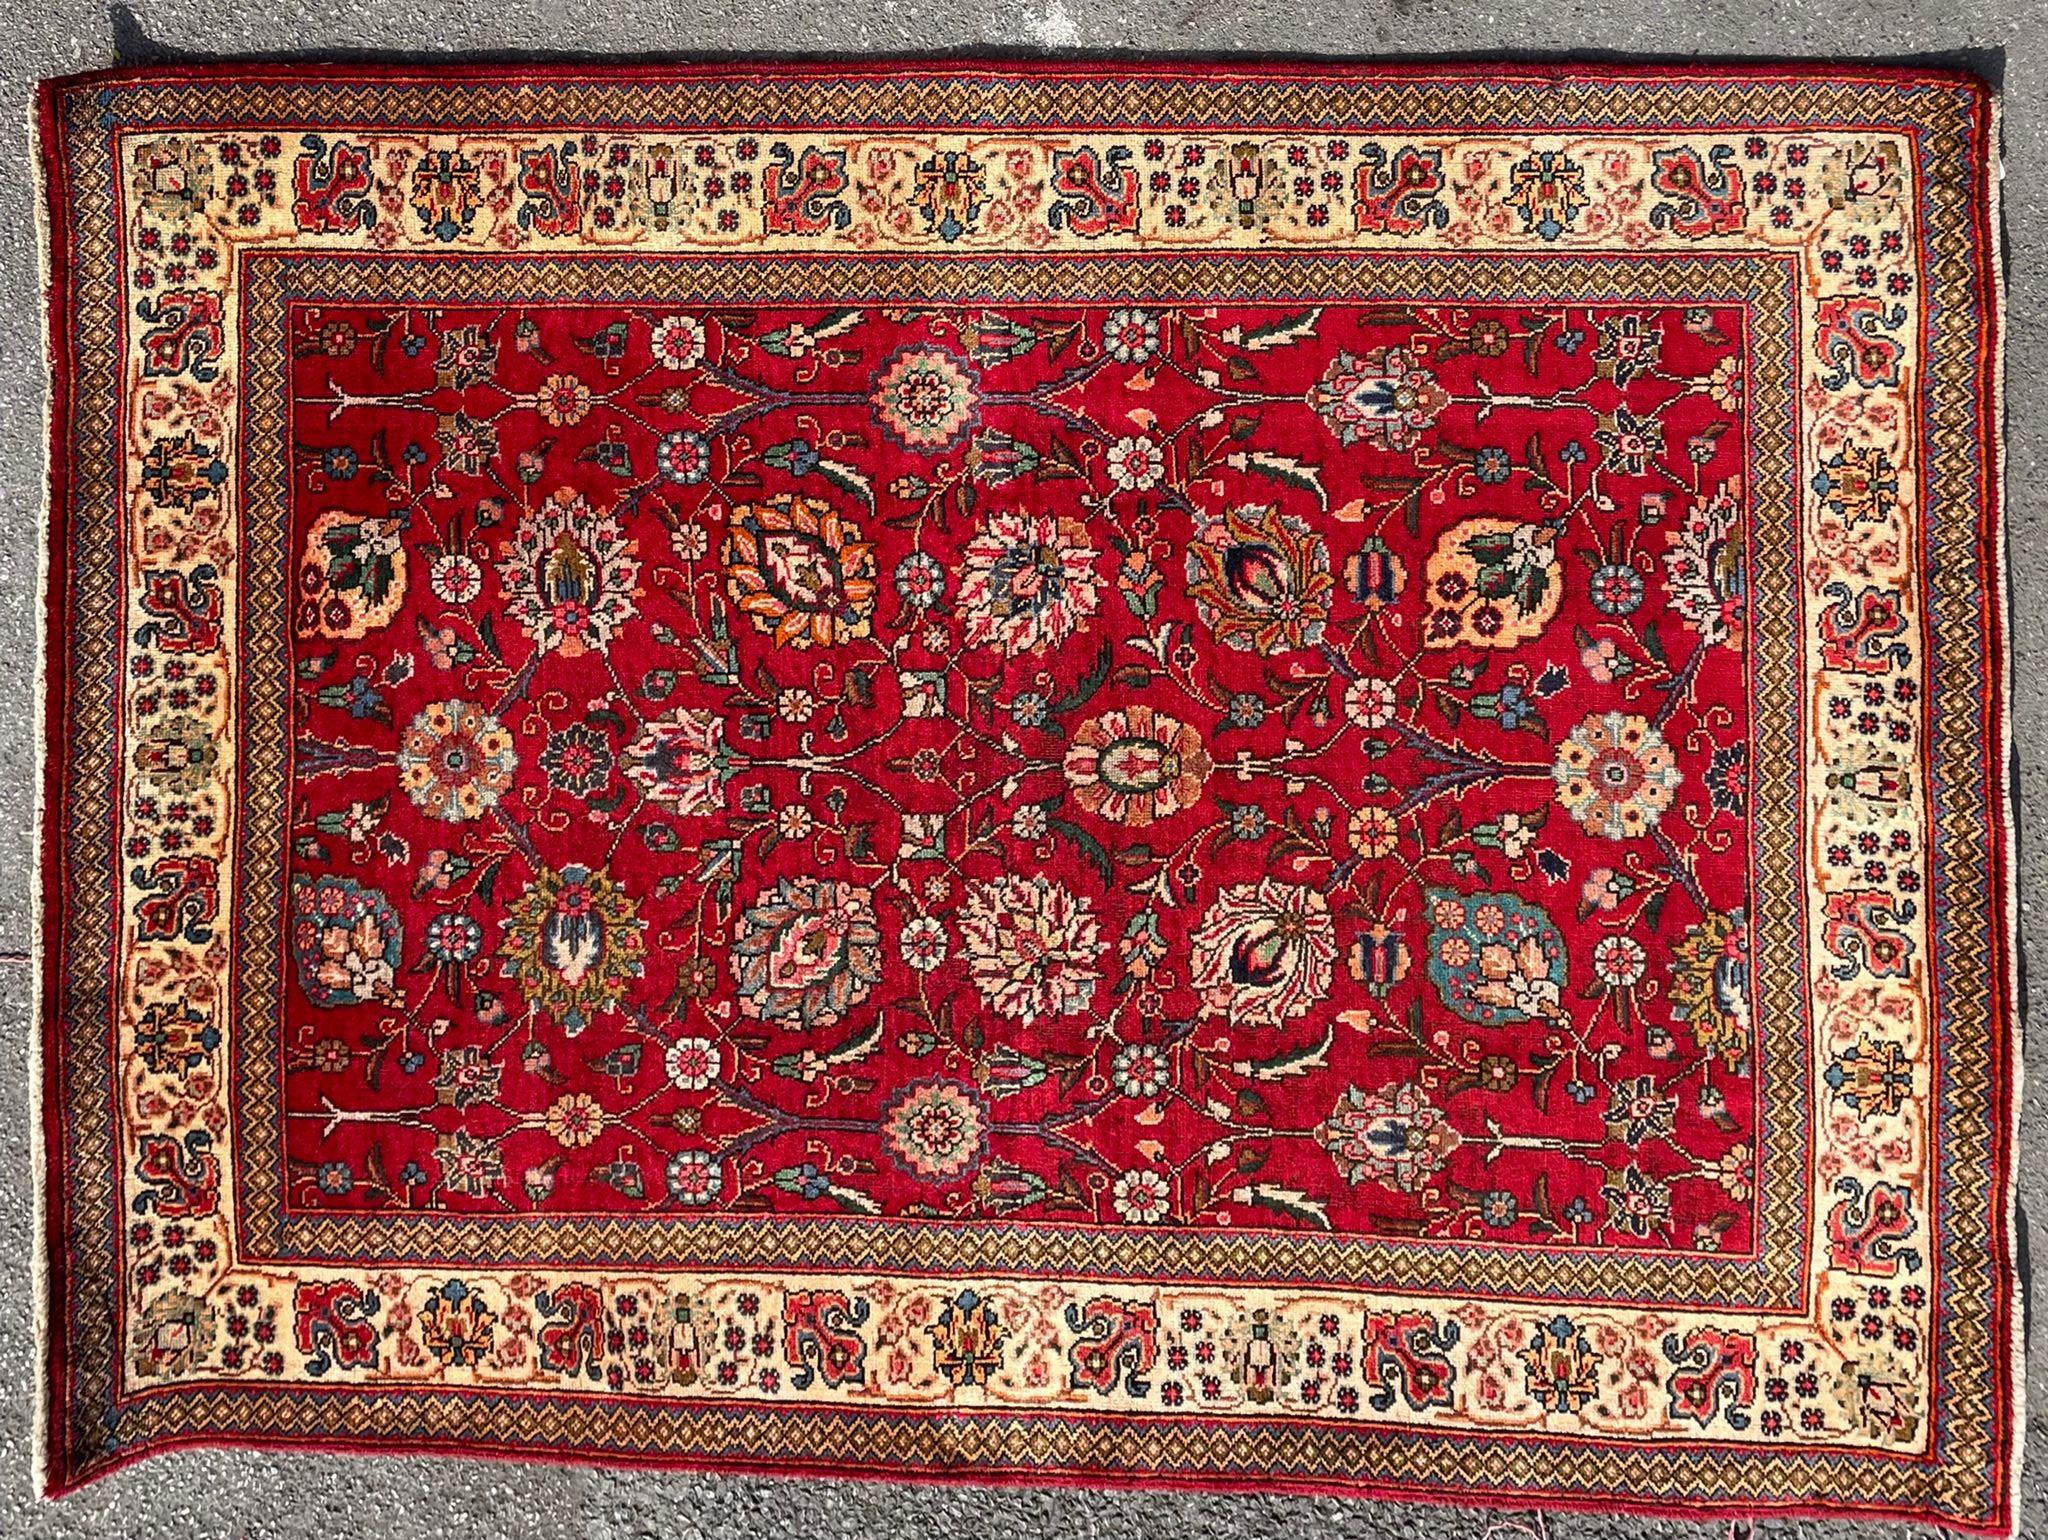 AN EARLY 20TH CENTURY HAND KNOTTED PERSIAN TABRIZ FLOOR RUG - Image 5 of 7